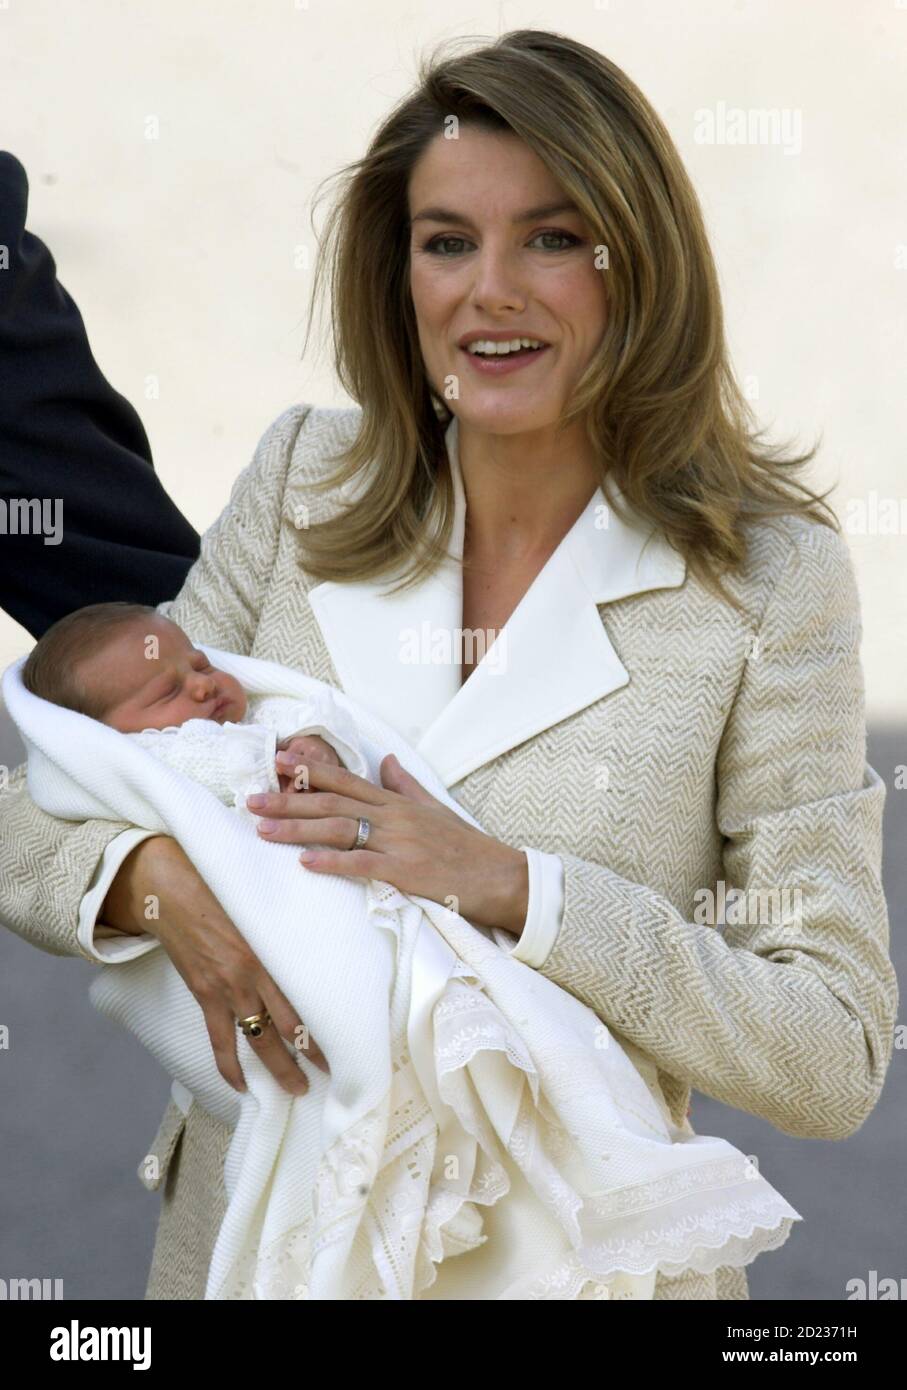 Spain's Princess Letizia smiles as she holds her new born Infanta Leonor as  they leave hospital in Madrid, November 7, 2005. Spain's future queen,  Princess Letizia, gave birth one week ago to